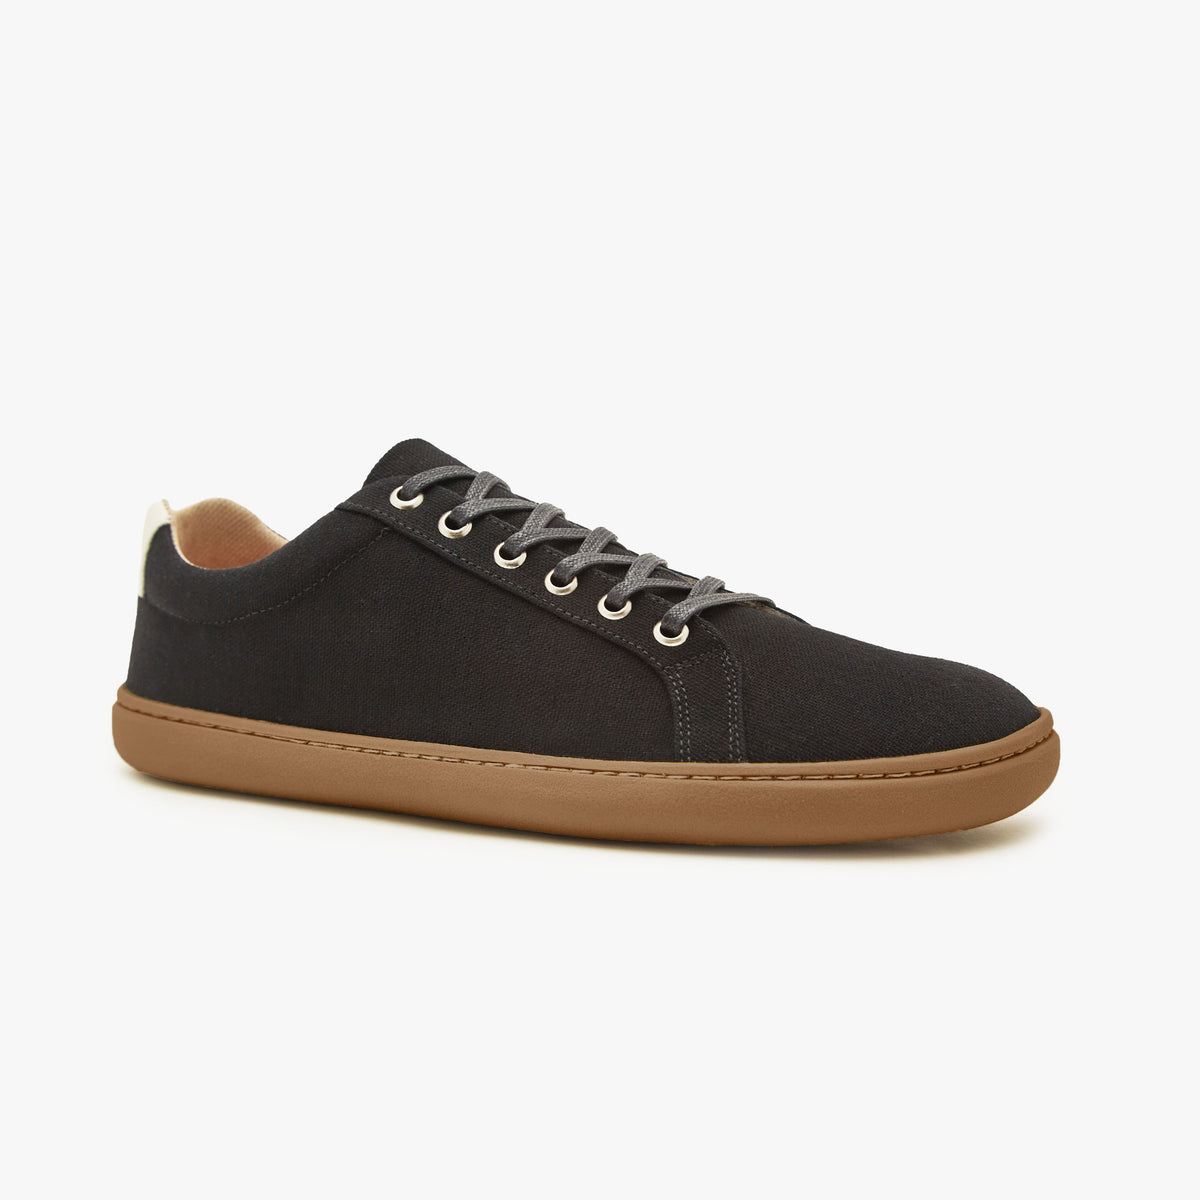 Barefoot shoes for men - Black - The Everyday Sneaker Gen 3 in Cotton ...